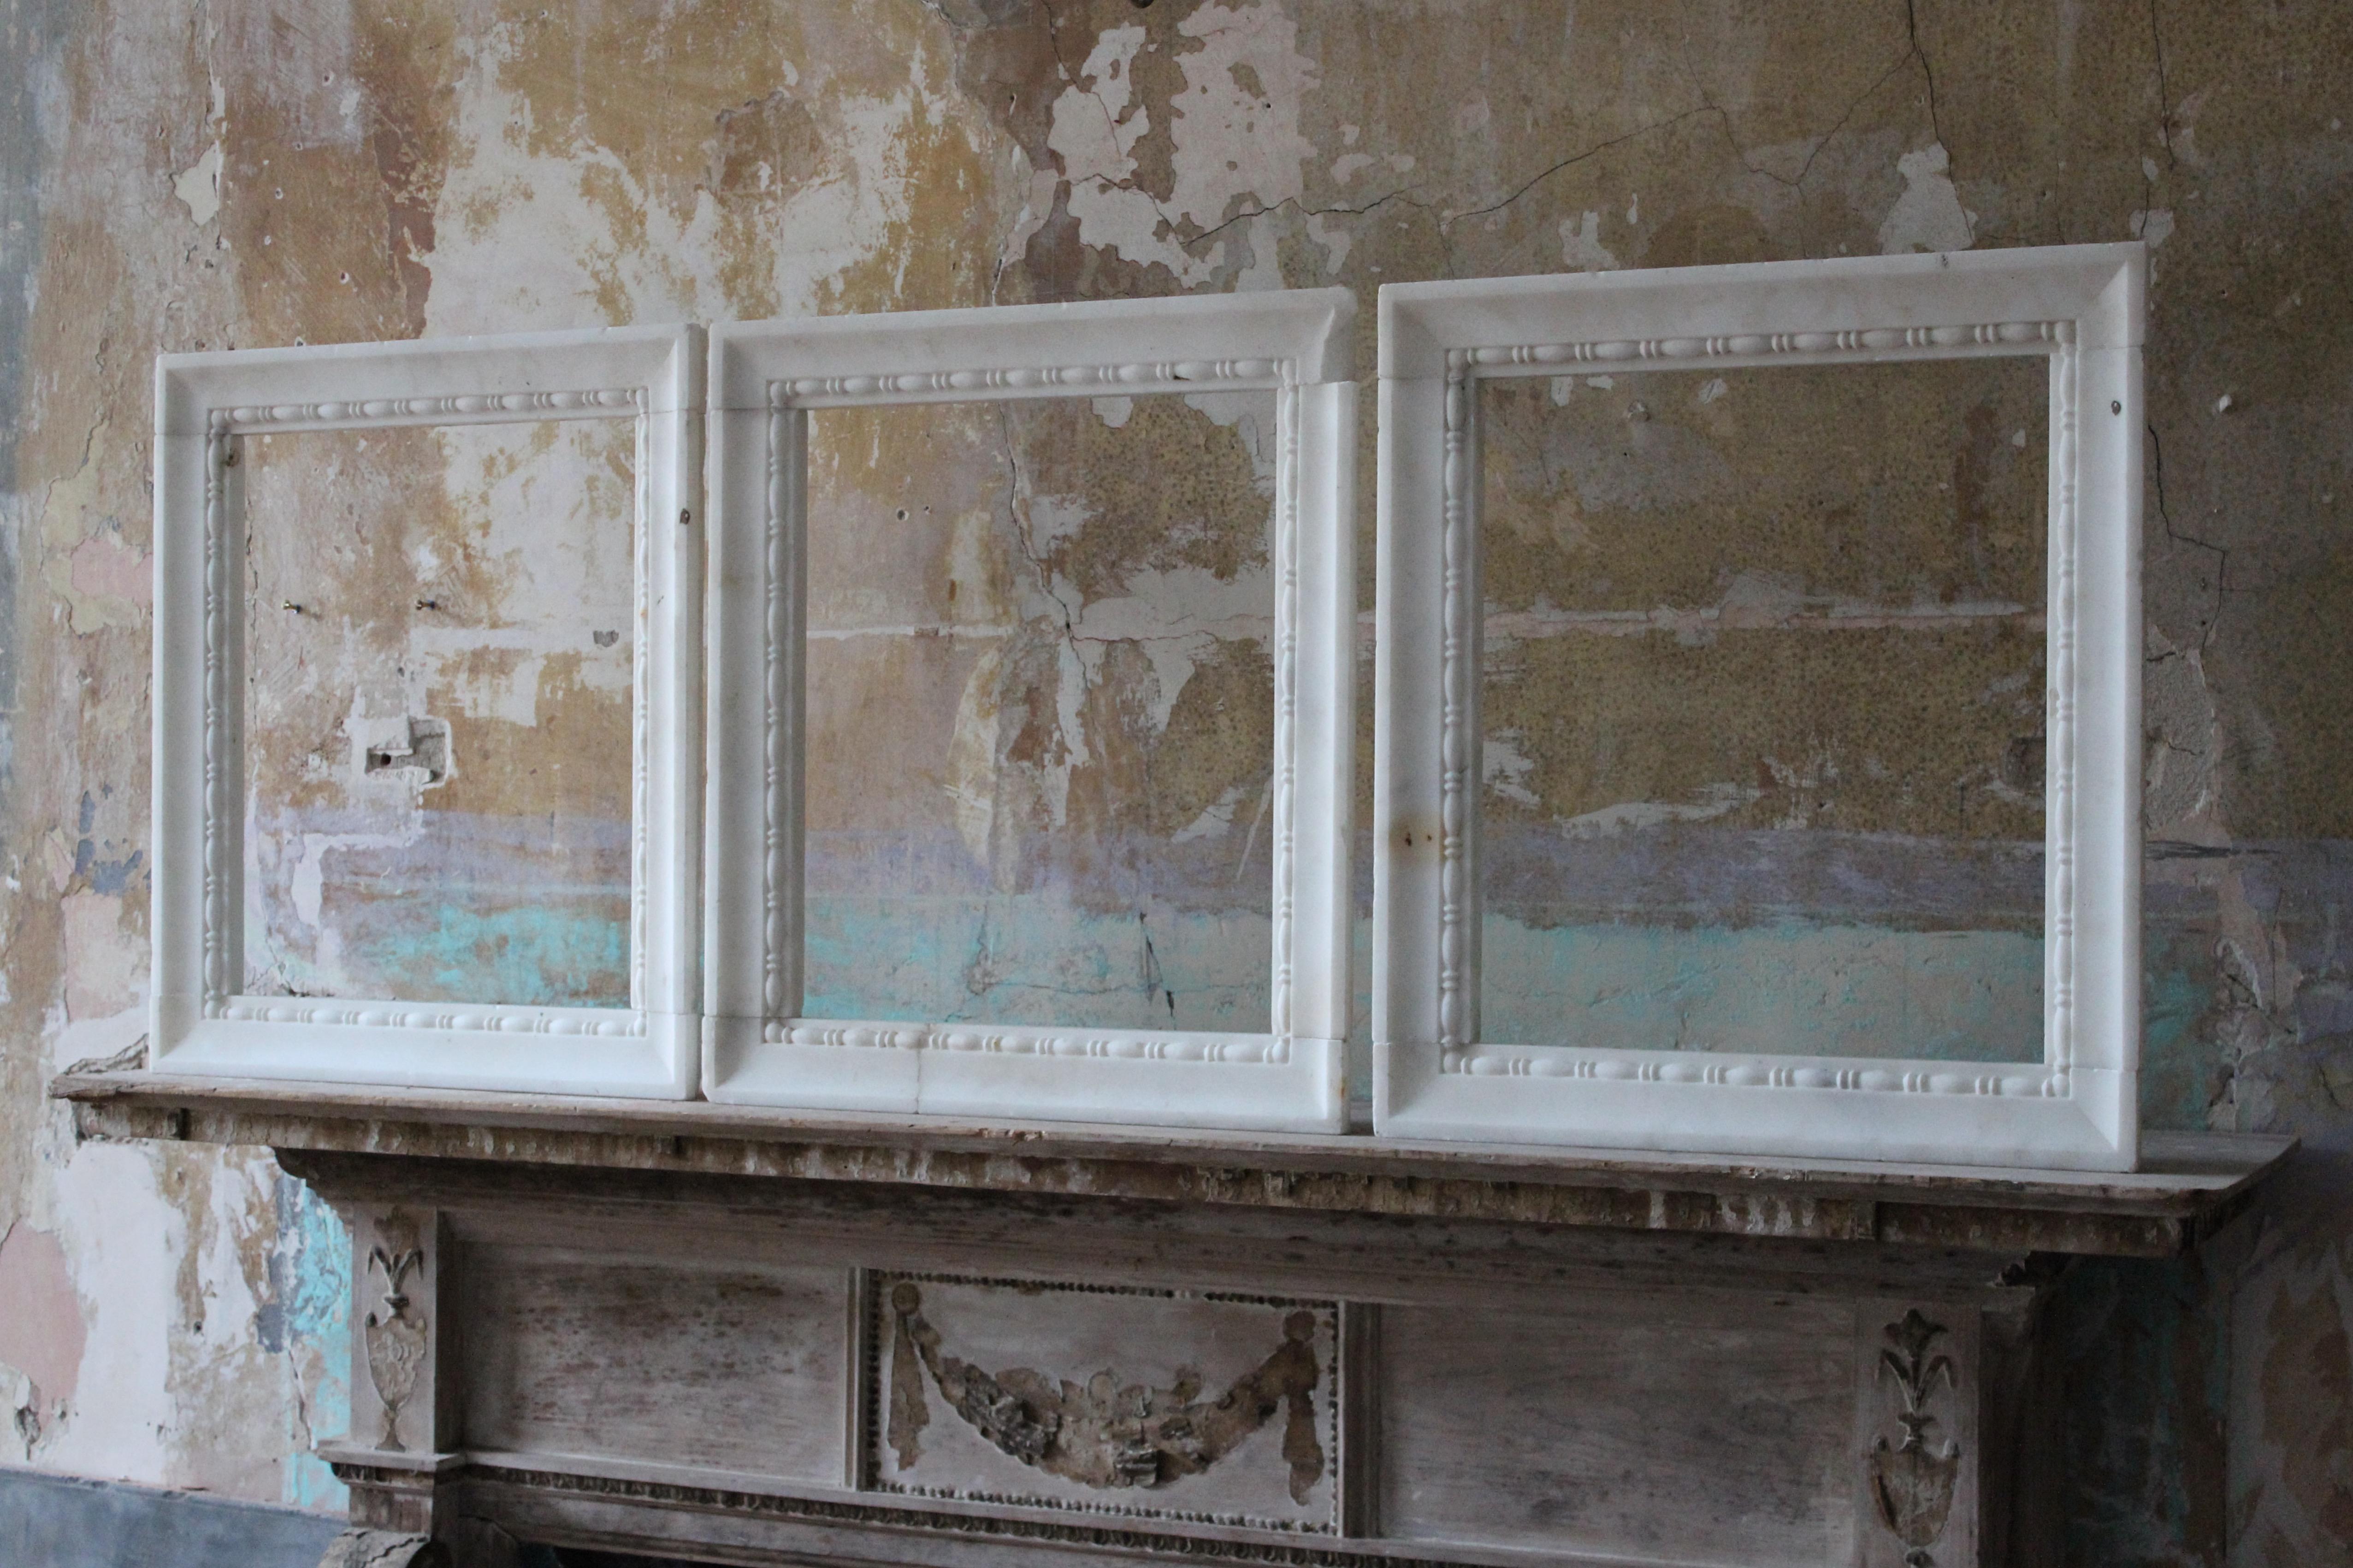 Mid 19th century trio of hand carved marble frames, all with balustrade border decorations previously part of larger interior architectural feature

The sections are extremely well carved, crisp and have a good decorative patina, some minor nibbles